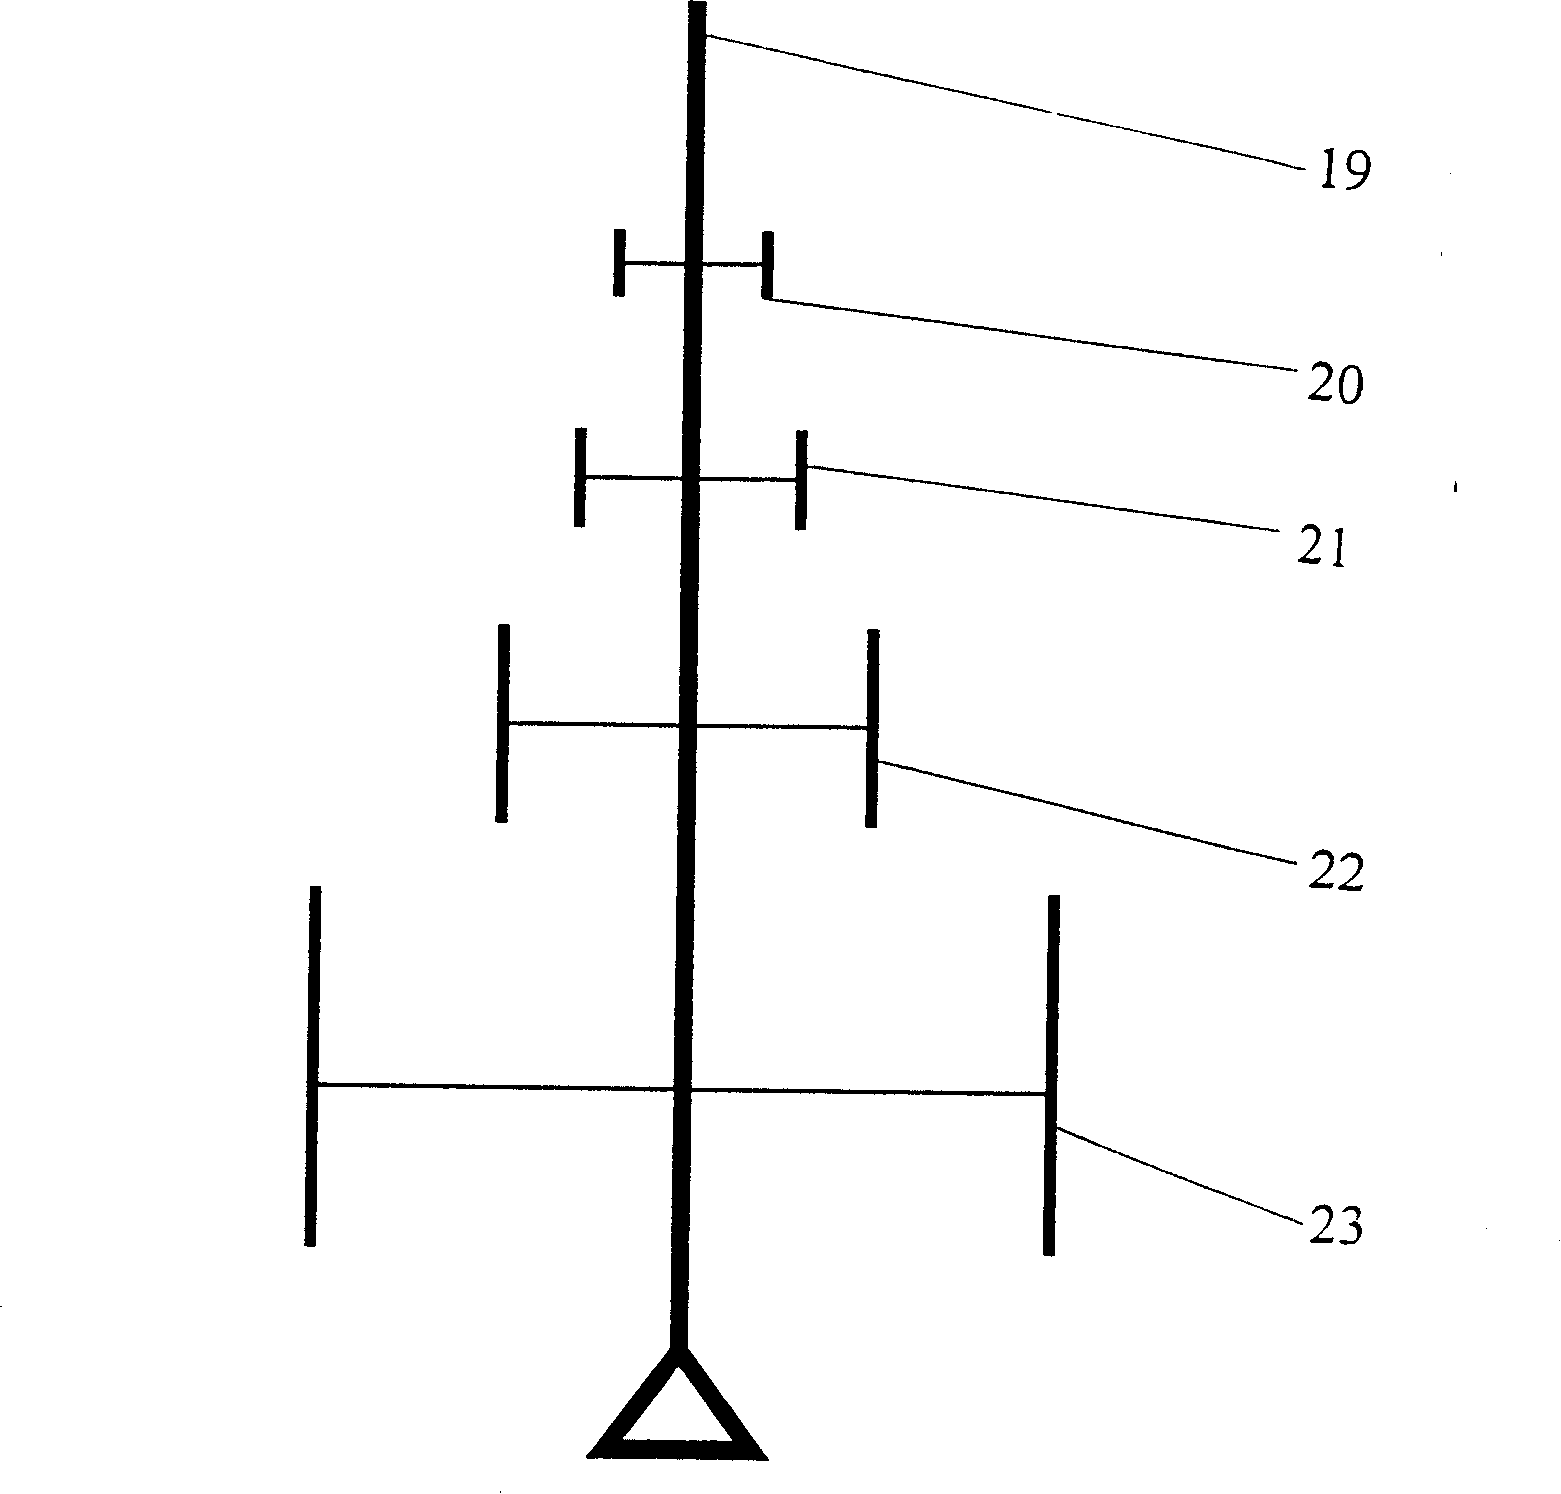 Multi-channel radio monitoring and correlation interference direction-finding fixed station system